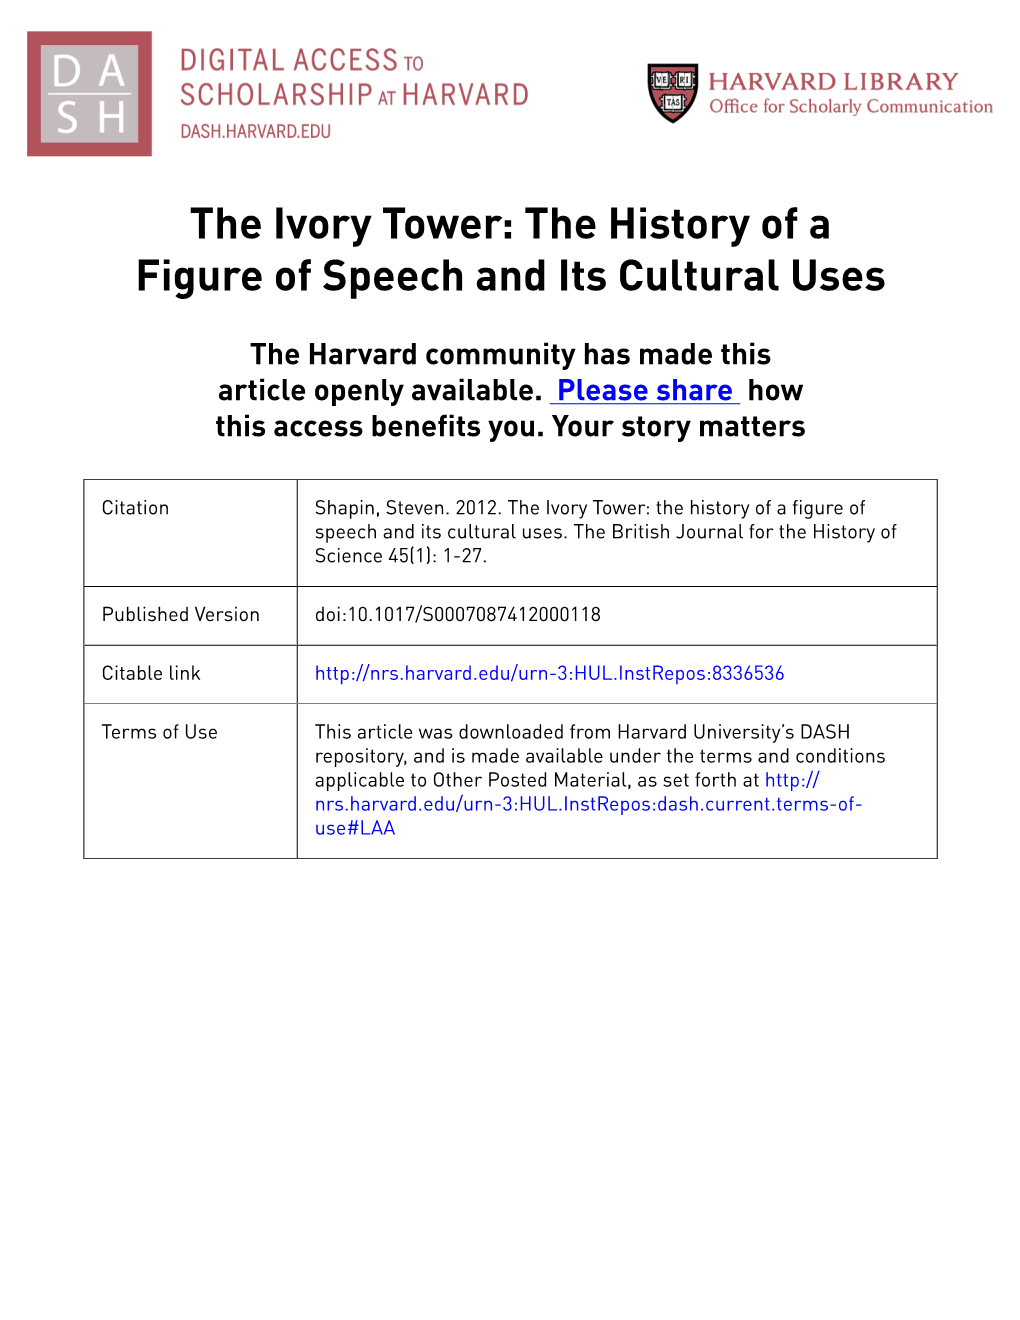 The Ivory Tower: the History of a Figure of Speech and Its Cultural Uses